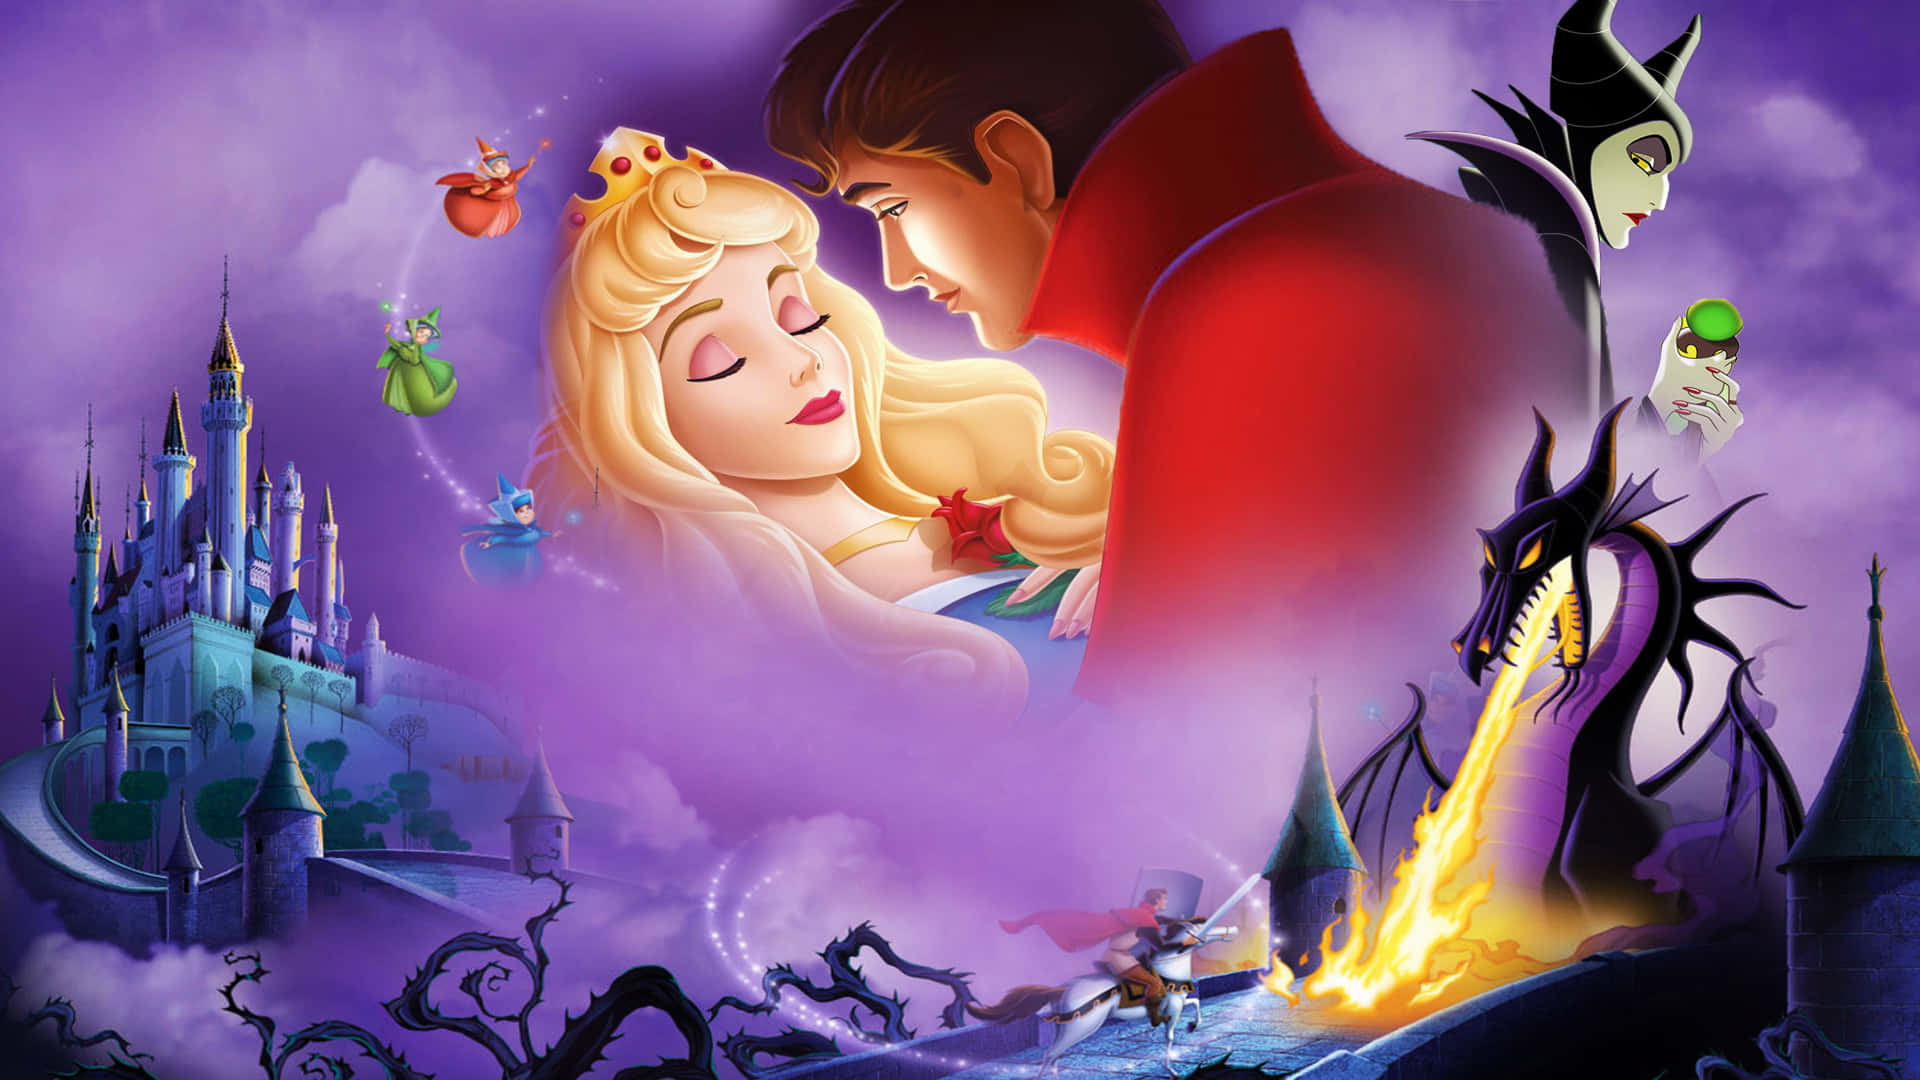 Image  Sleeping Beauty Dreaming of a Happily Ever After